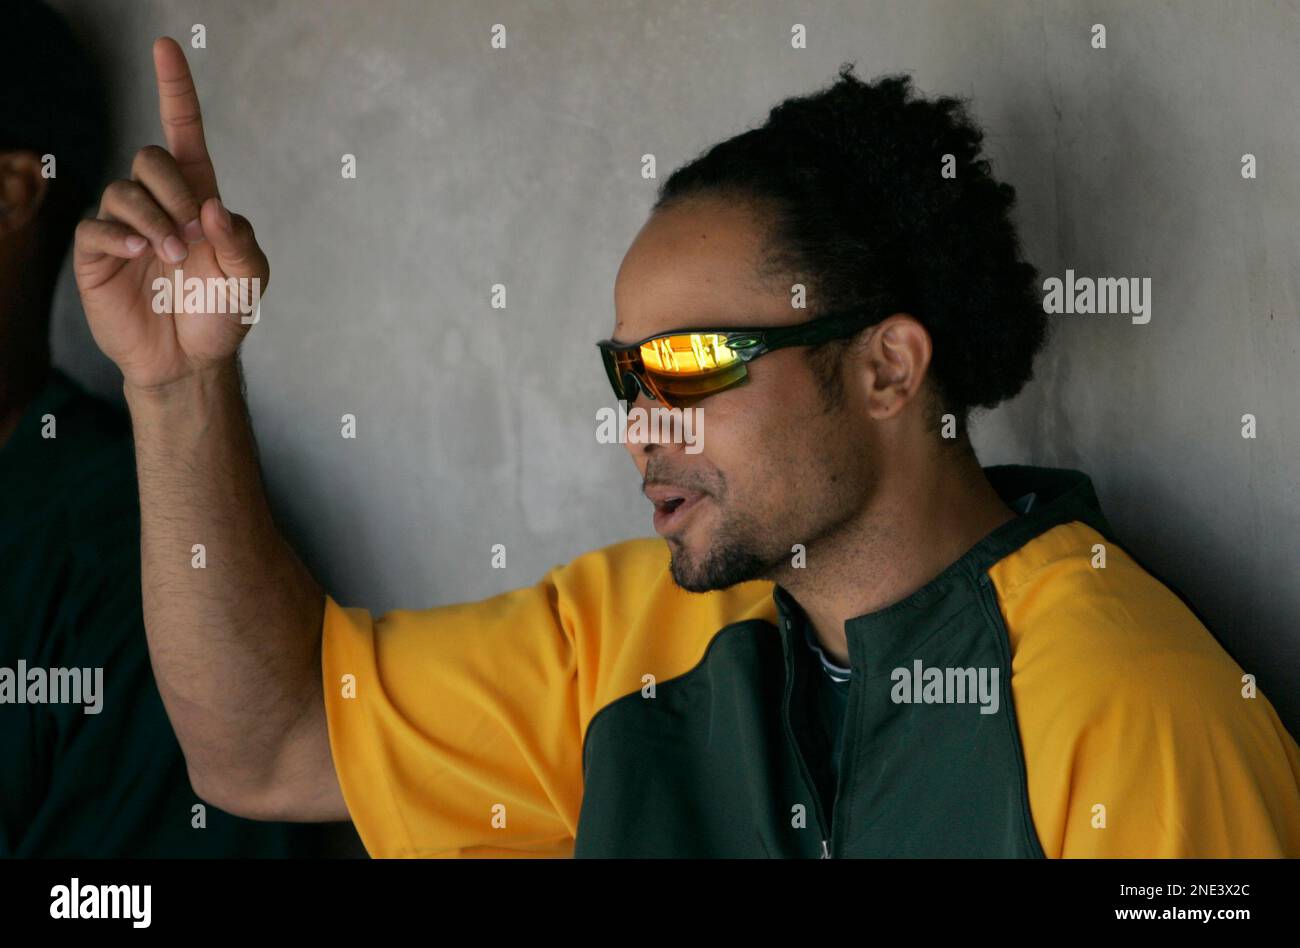 Oakland Athletics' Coco Crisp sits in the dugout as he shows off his hair  before action against the Detroit Tigers at Oakland-Alameda County Coliseum  in Oakland, California, on Thursday, April 14, 2011. (